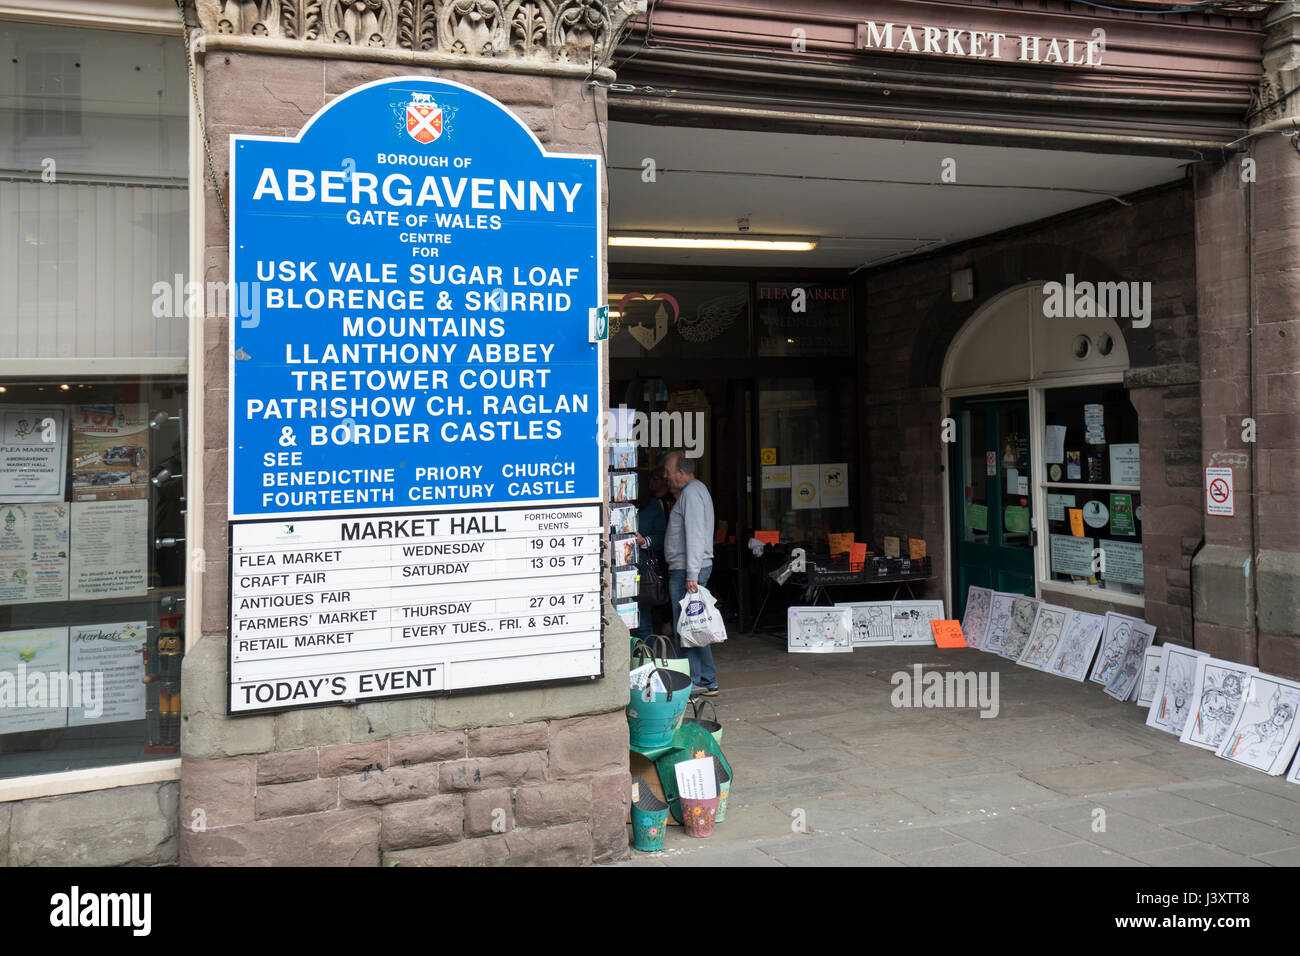 Welcome sign on the market hall, Abergavenny, with tourist attractions listed, Wales, UK Stock Photo